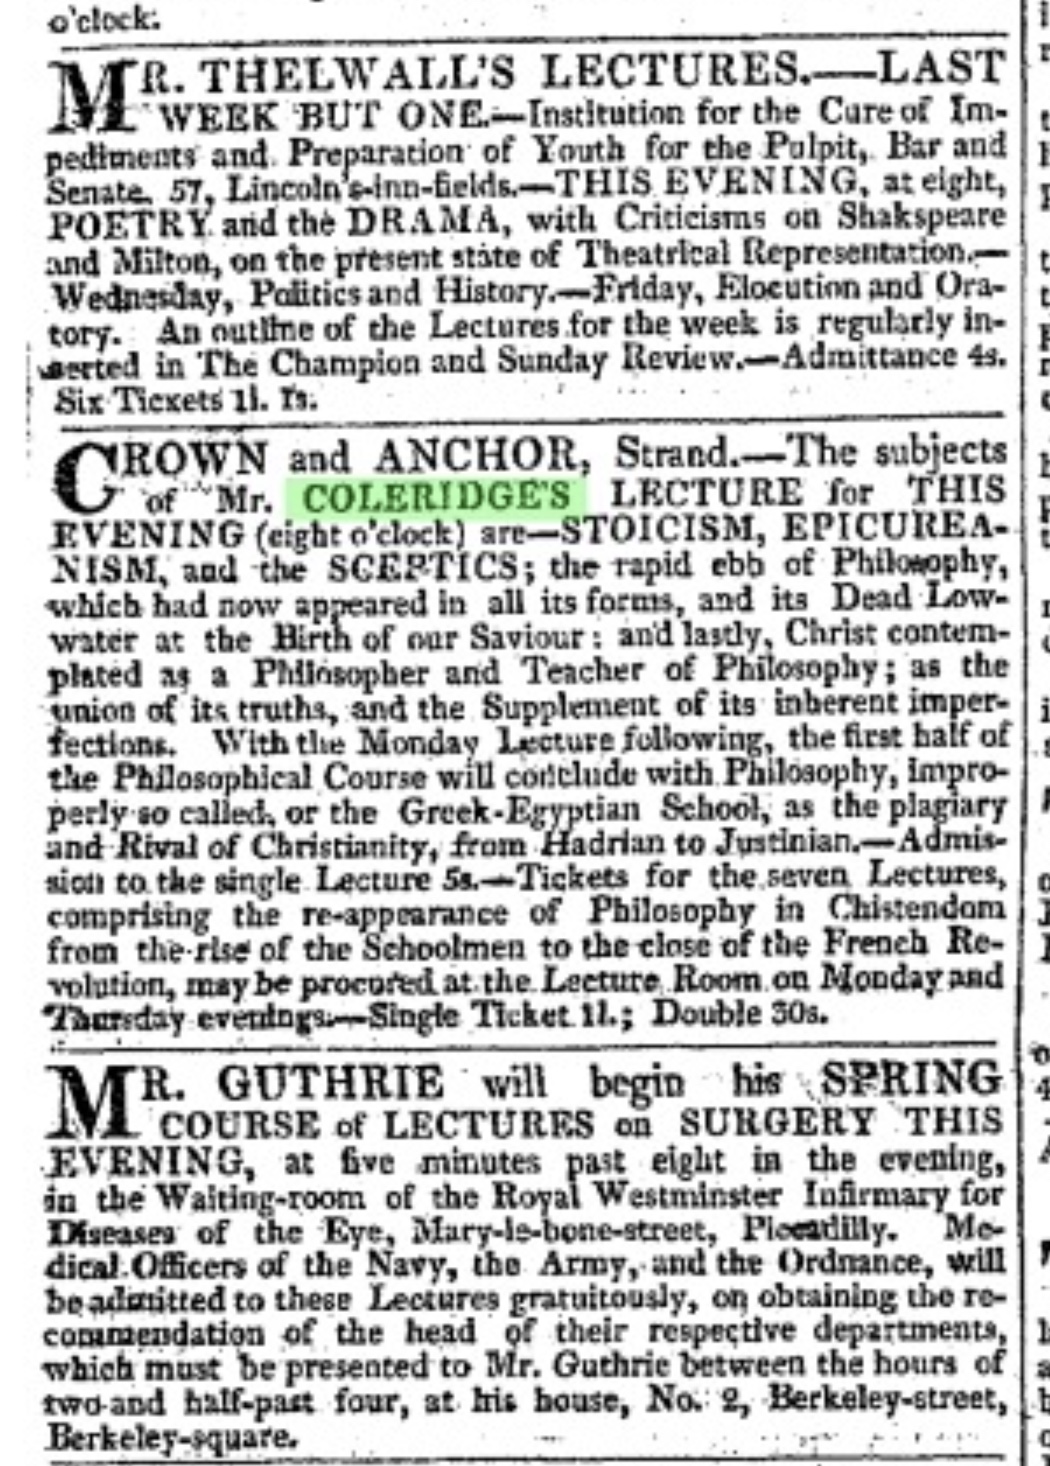  *Coleridge’s lecture (on just about everything) advertised in The Morning Chronicle, 25 January 1821. Keats might have got
        some of this on his walk with Coleridge. (Click image to enlarge.)